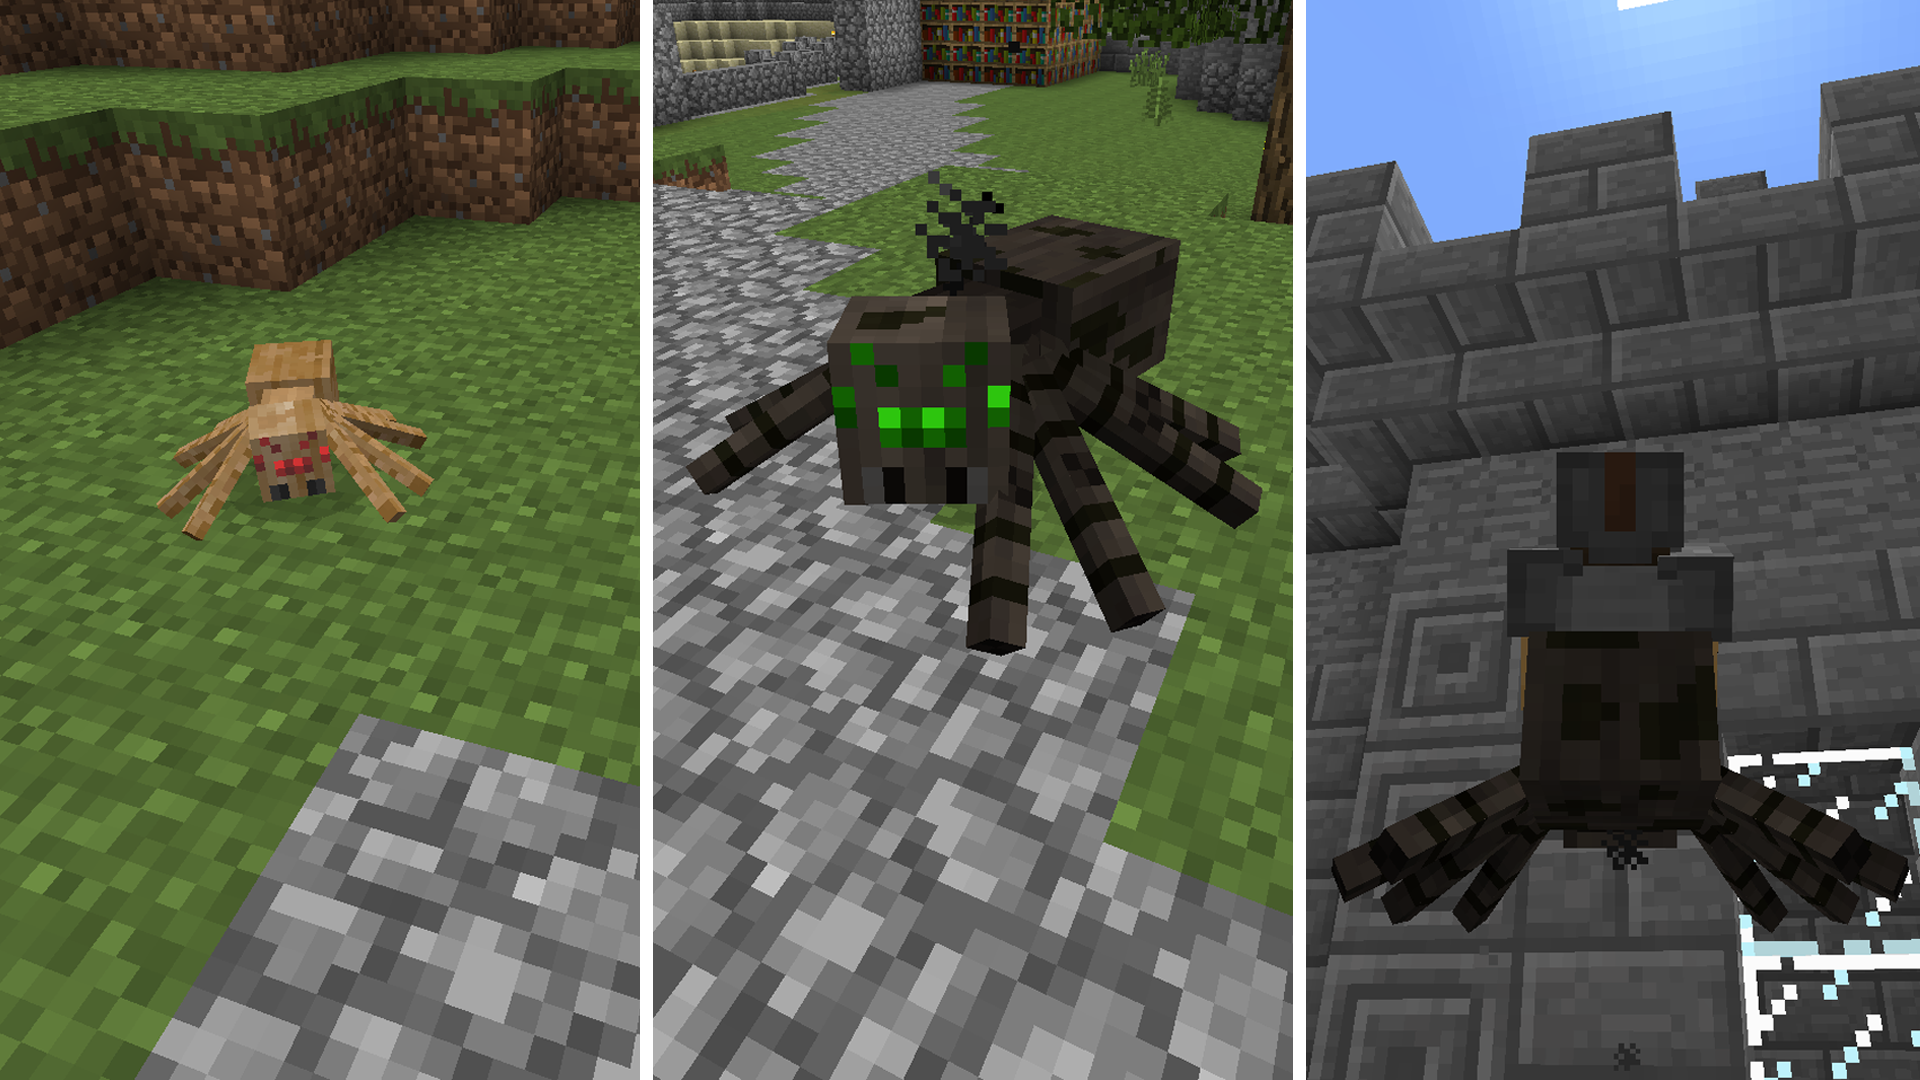 What Do Spiders Eat In Minecraft